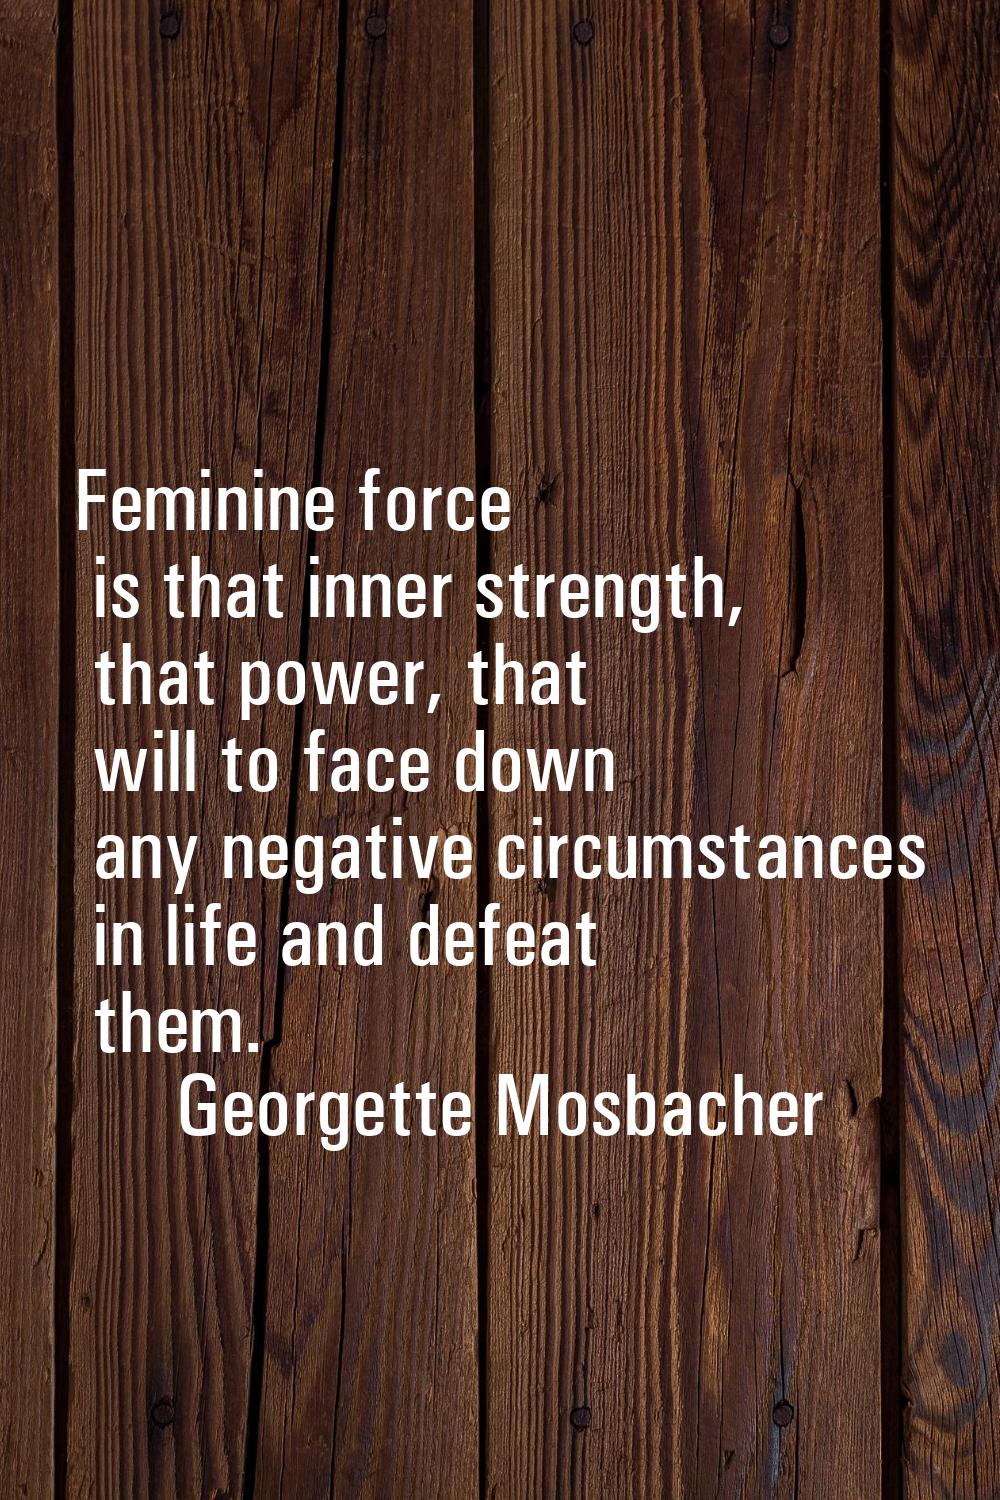 Feminine force is that inner strength, that power, that will to face down any negative circumstance